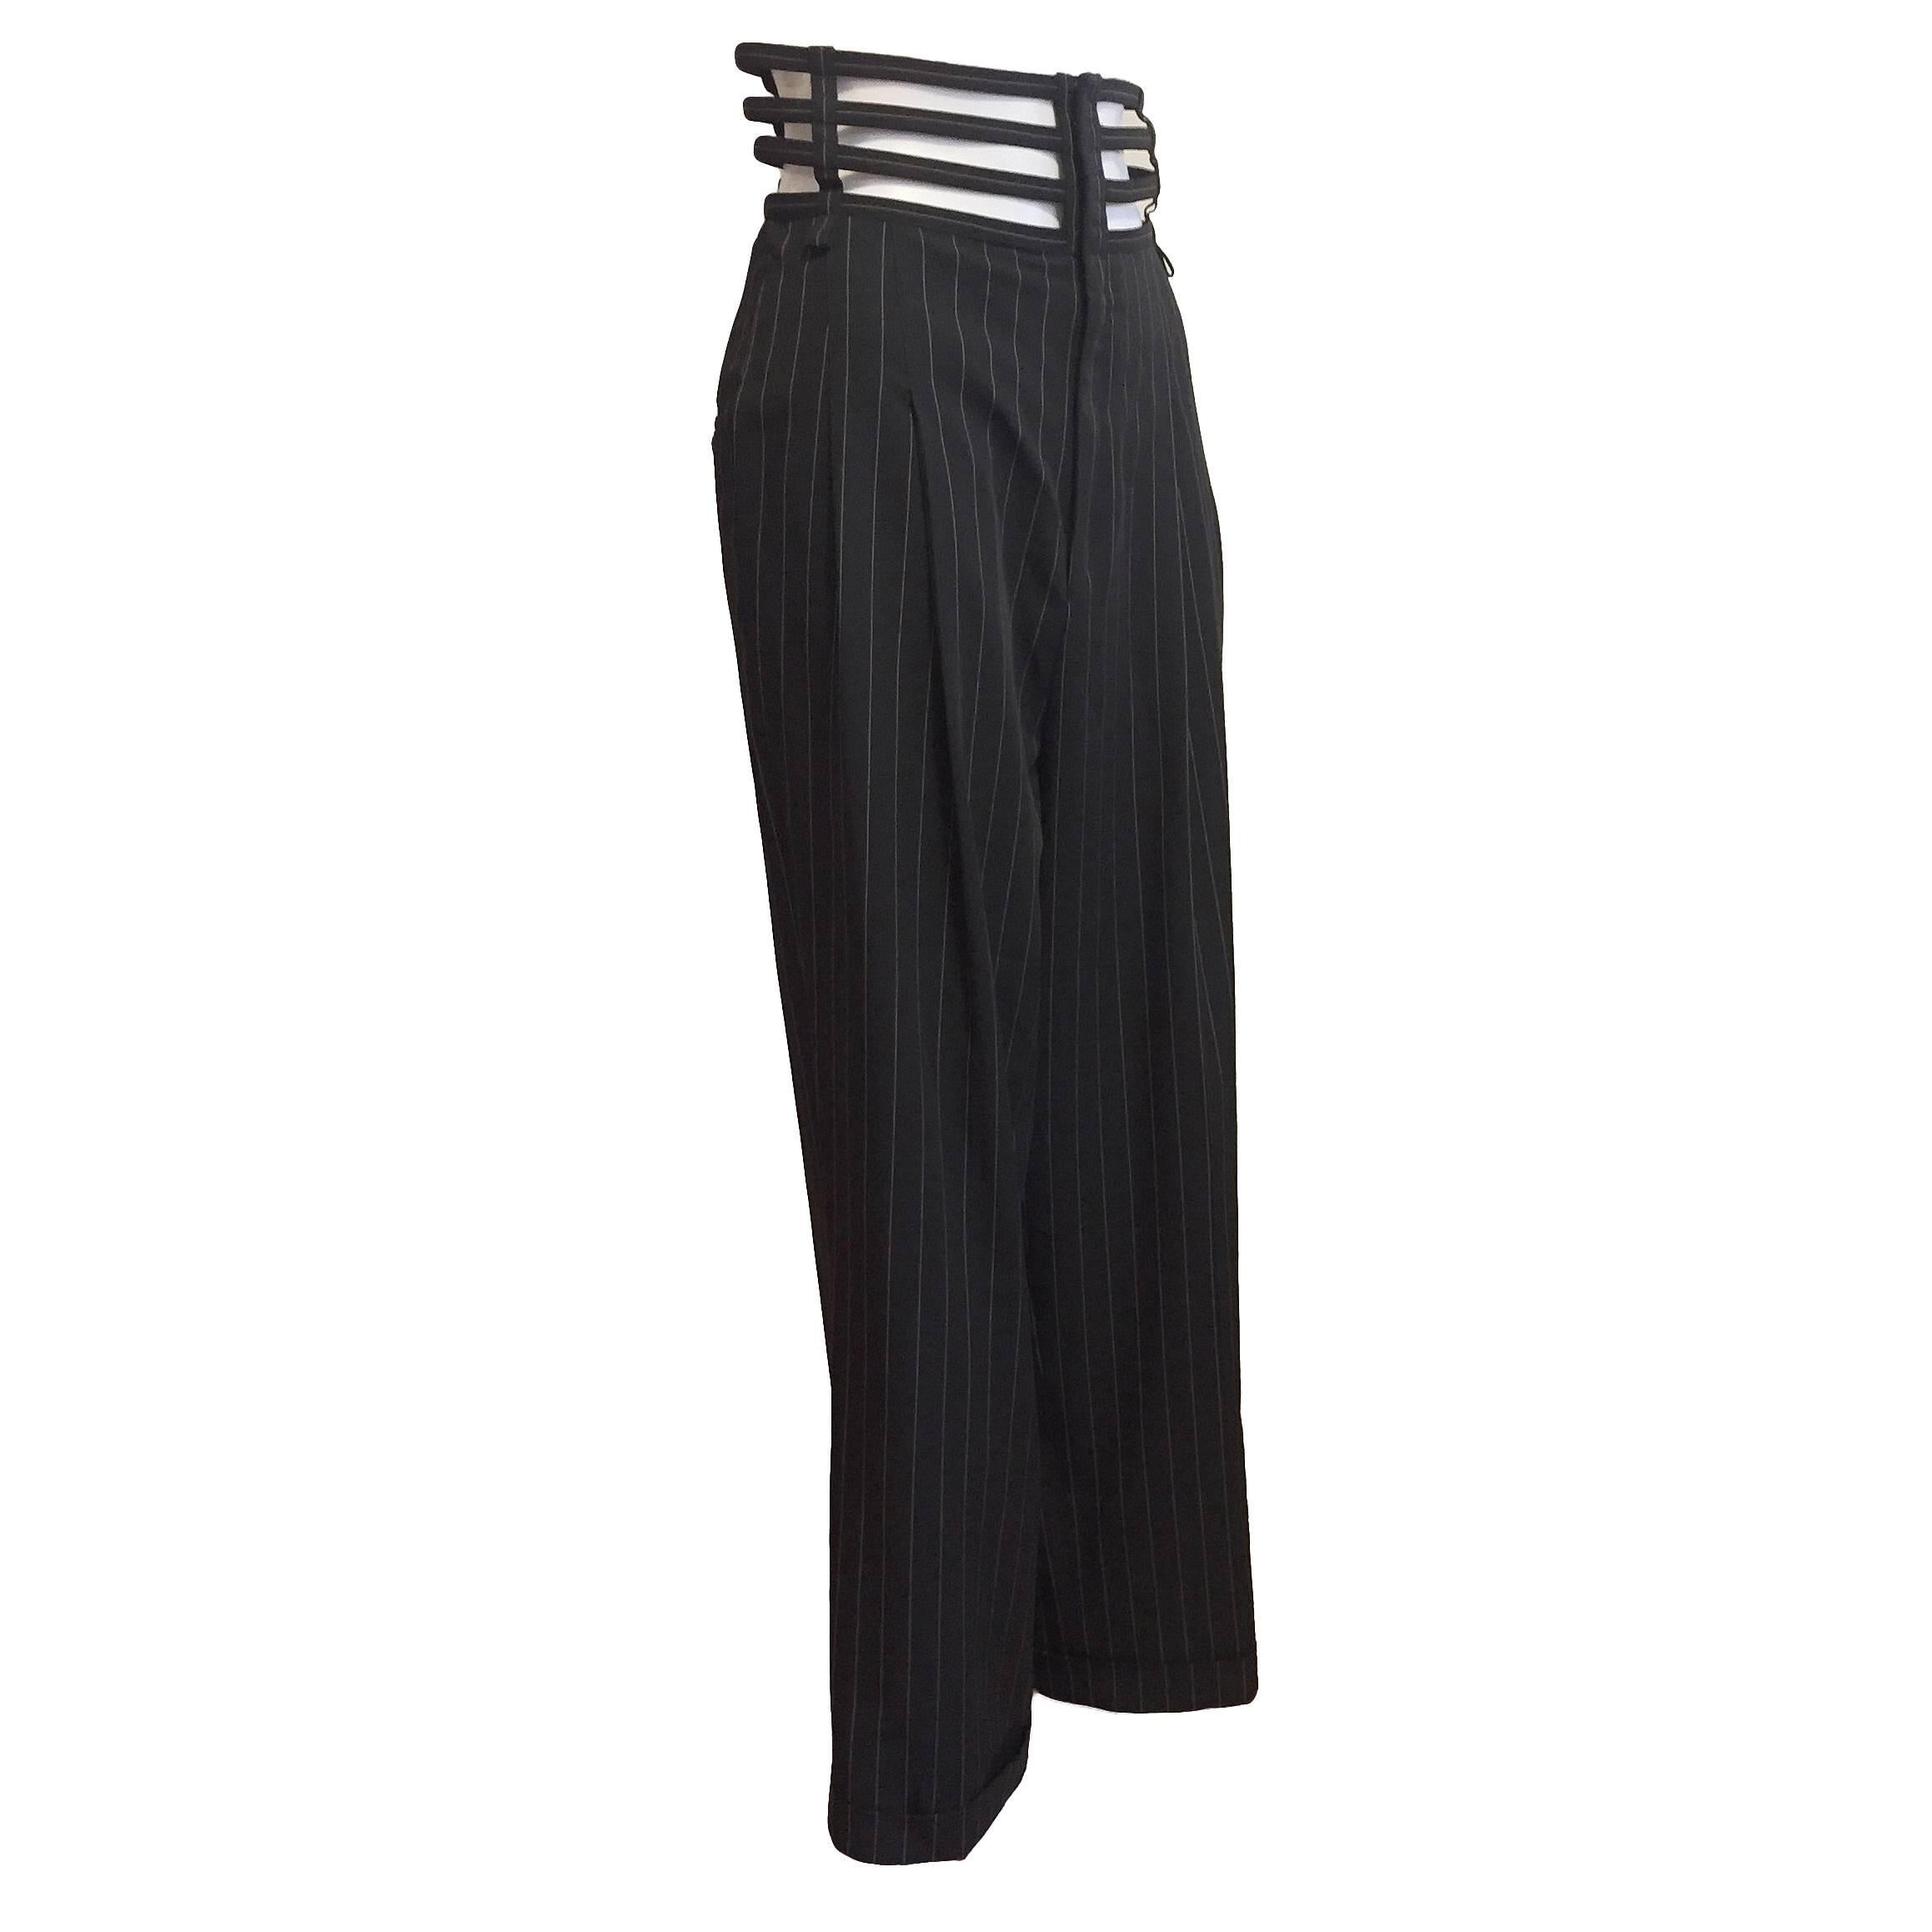 Iconic Jean Paul Gaultier Cage Pants, Circa 1990 For Sale